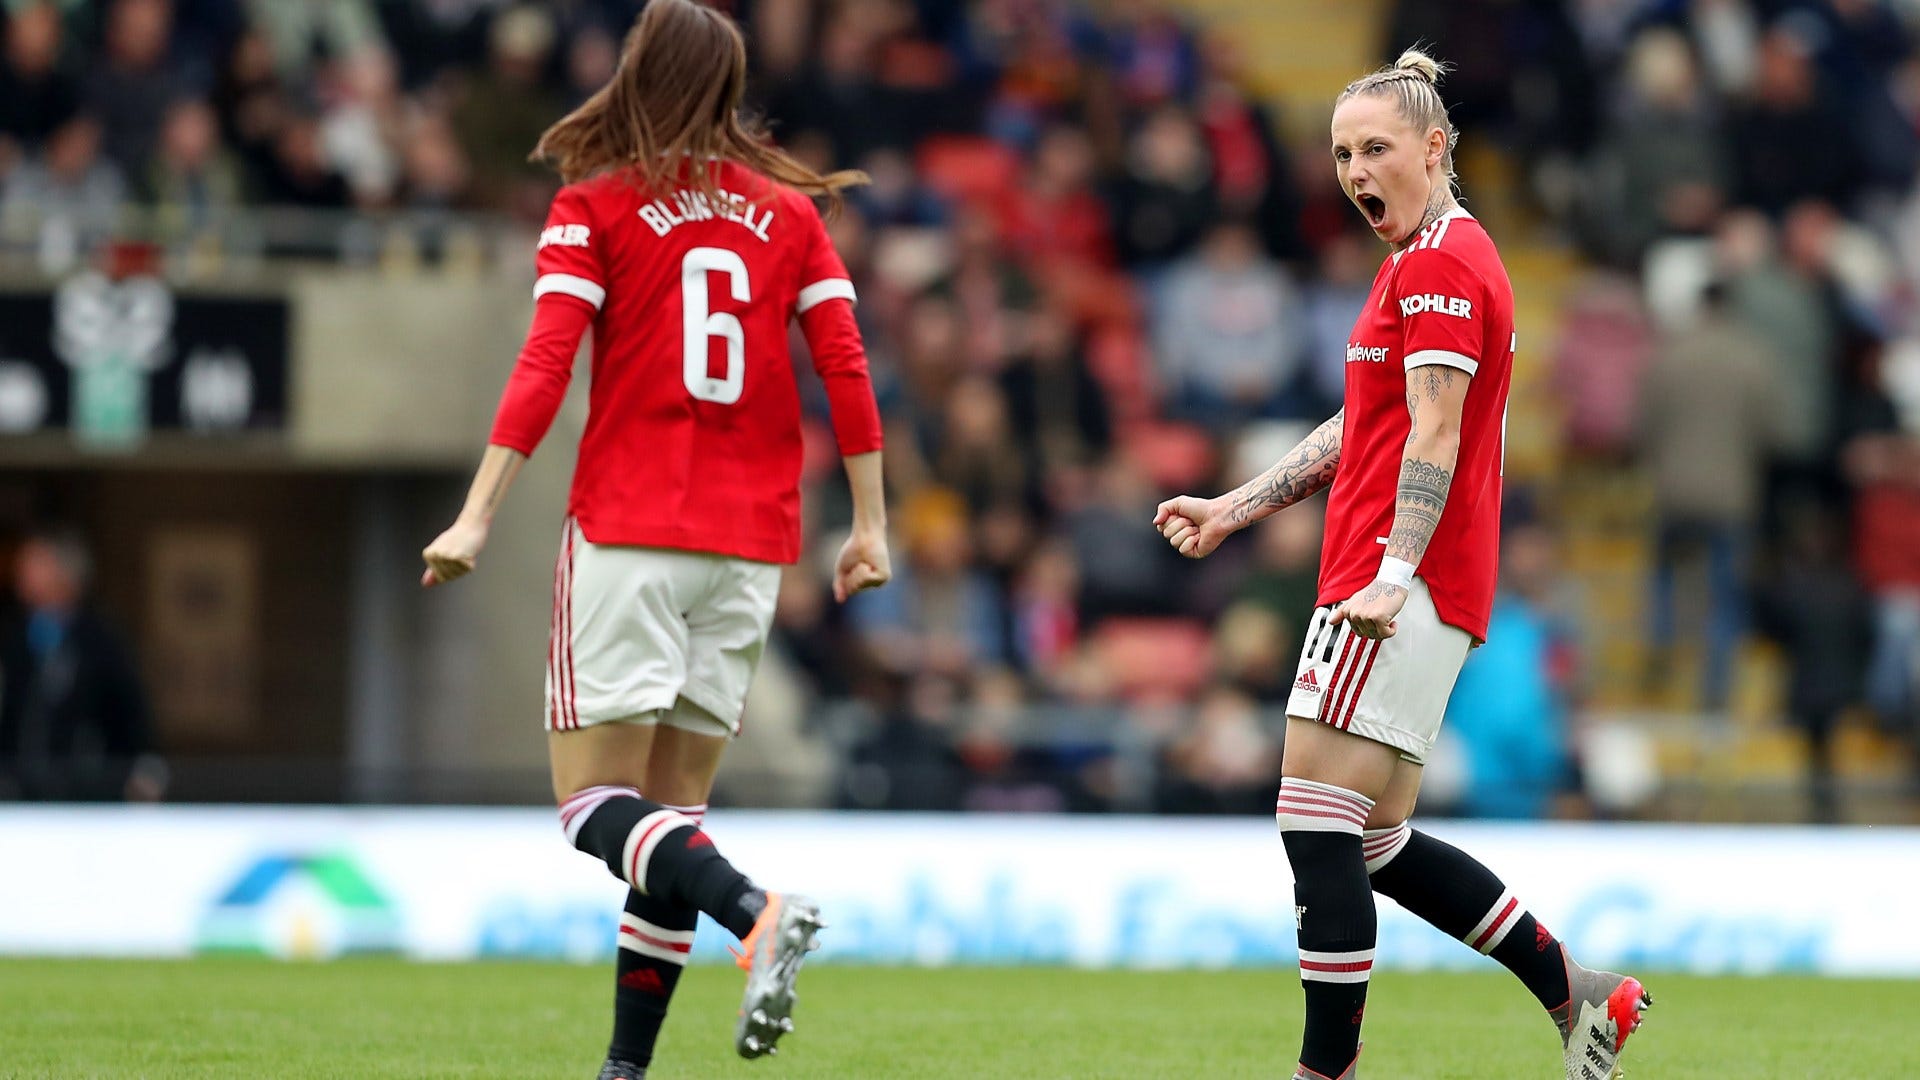 Manchester United Women vs Arsenal Women Where to watch the match online, live stream, TV channels and kick-off time Goal US